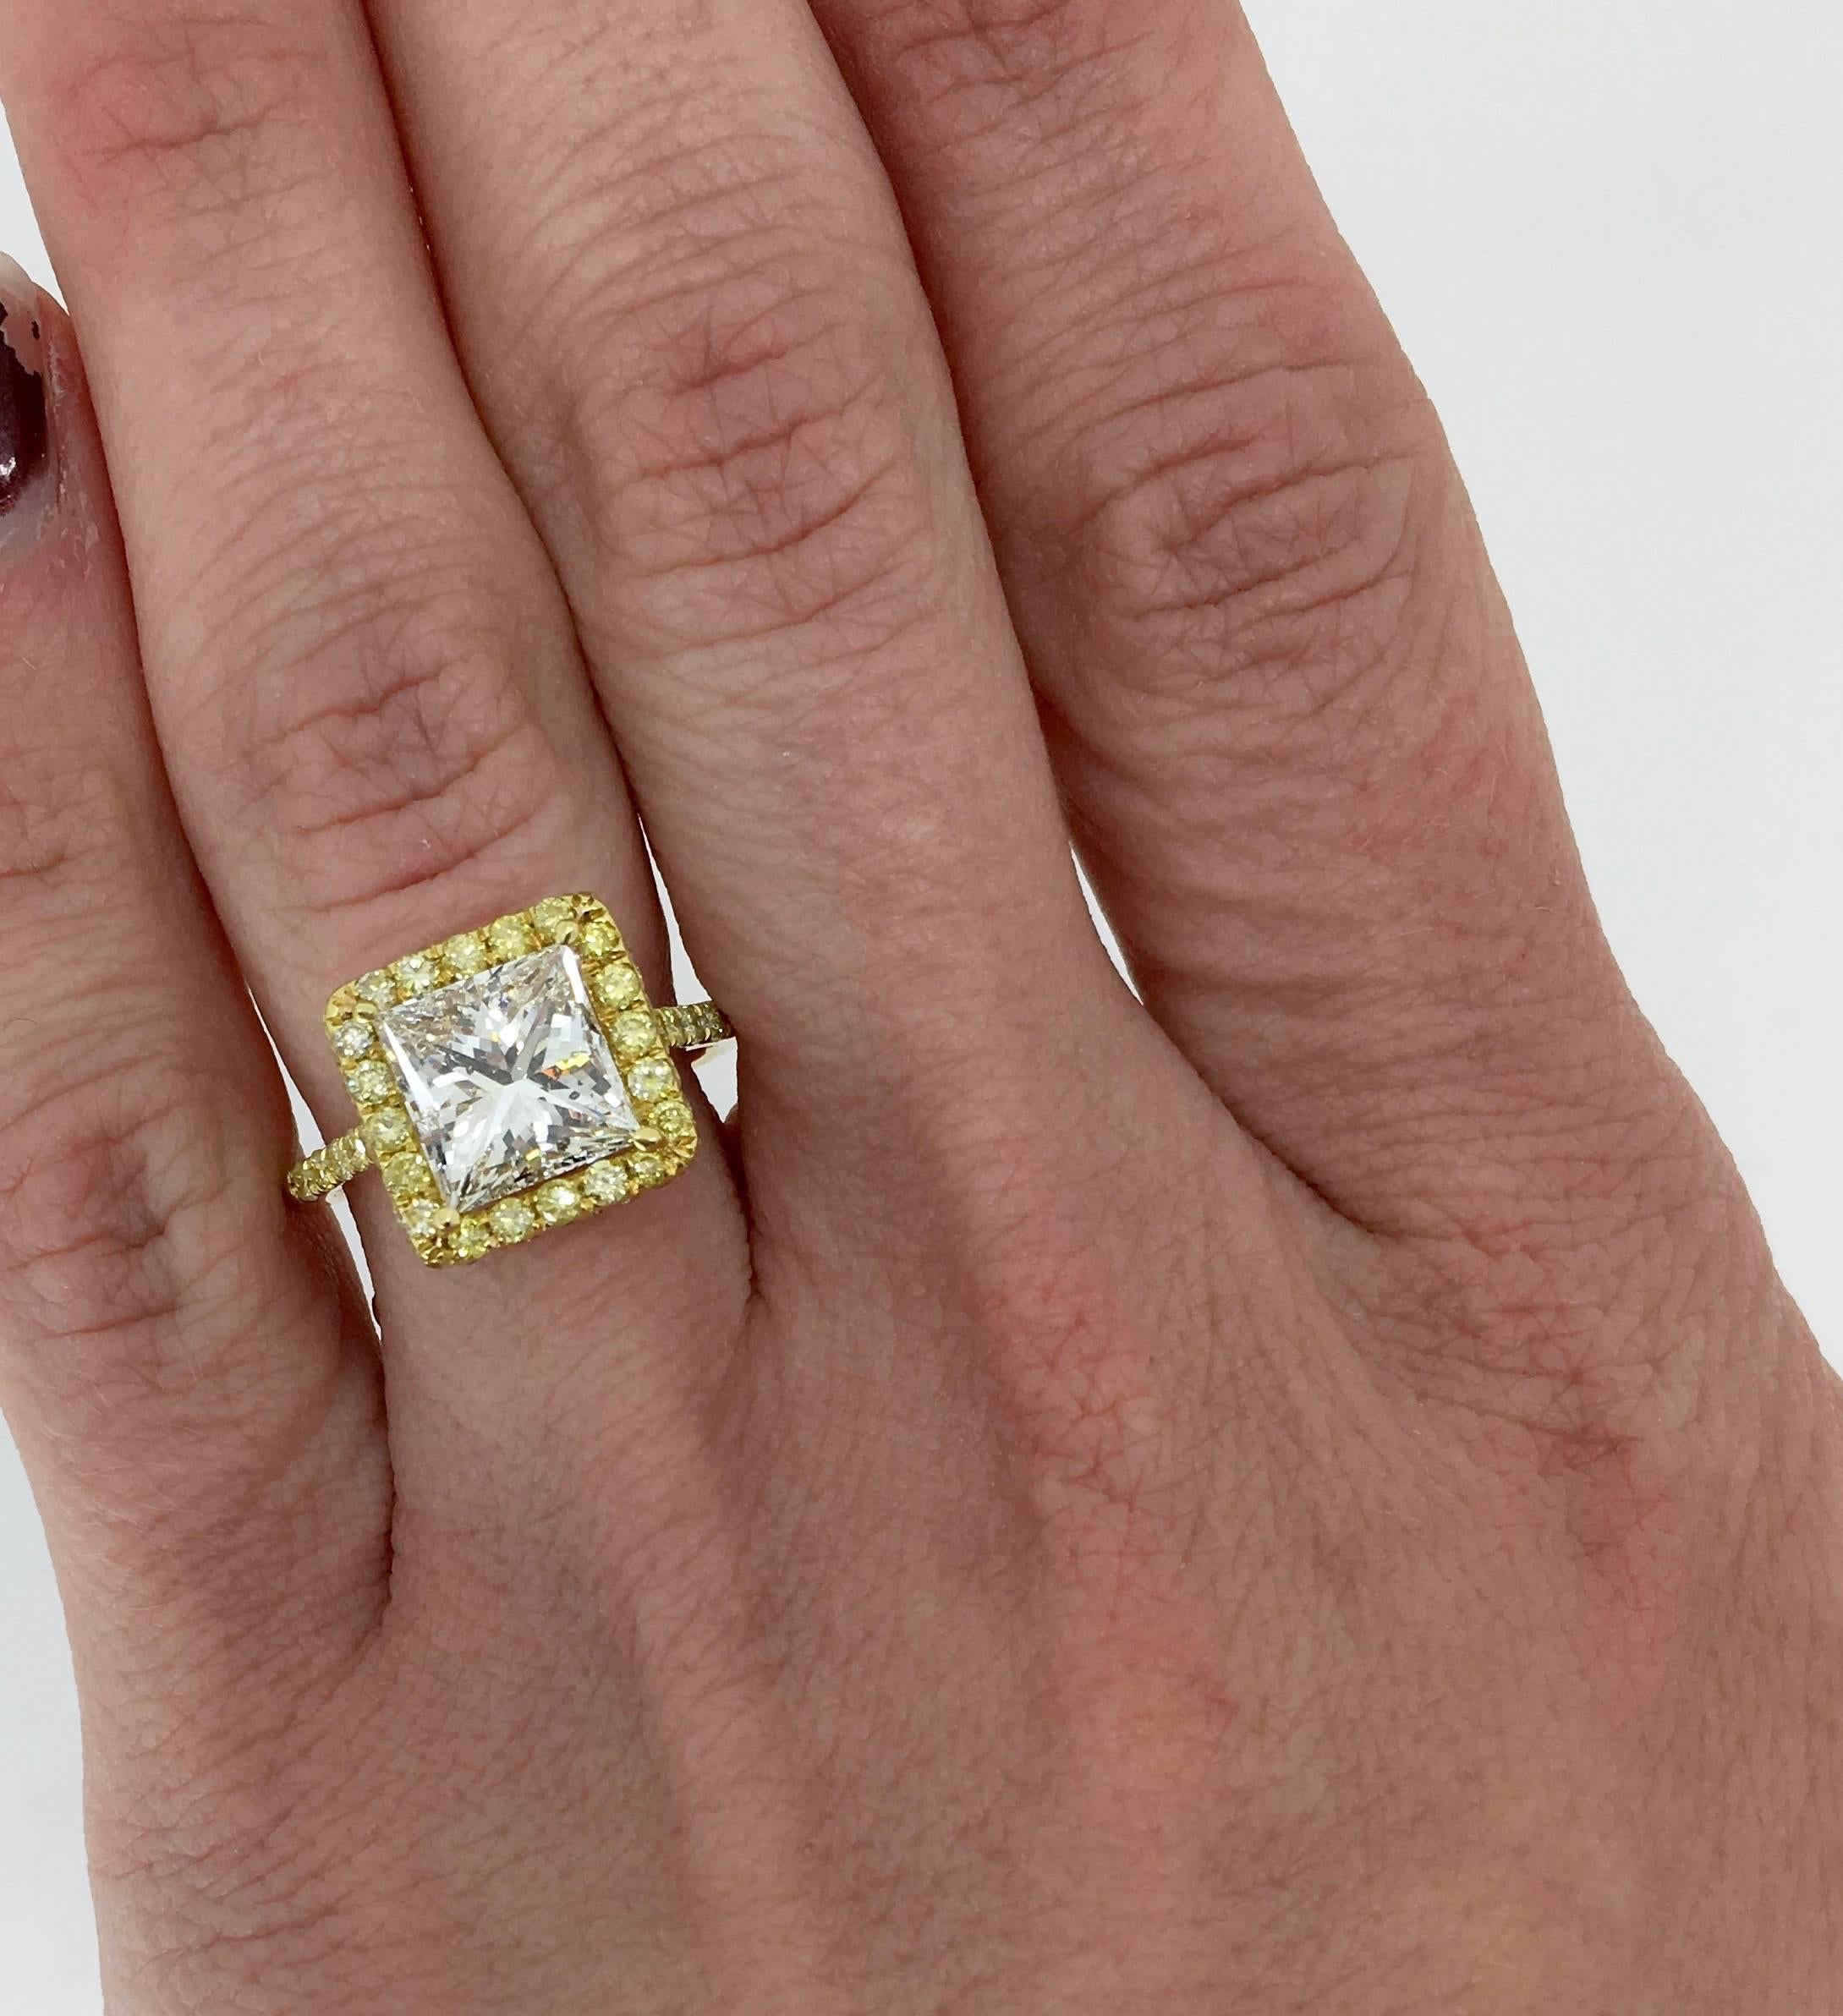 Stunning ring features an approximate 3.03CT Princess Cut Diamond in the center displaying J-K color and SI2 clarity. The 18K yellow gold ring is adorned with Yellow Round Brilliant Cut Diamonds all the way around the center stone and down the